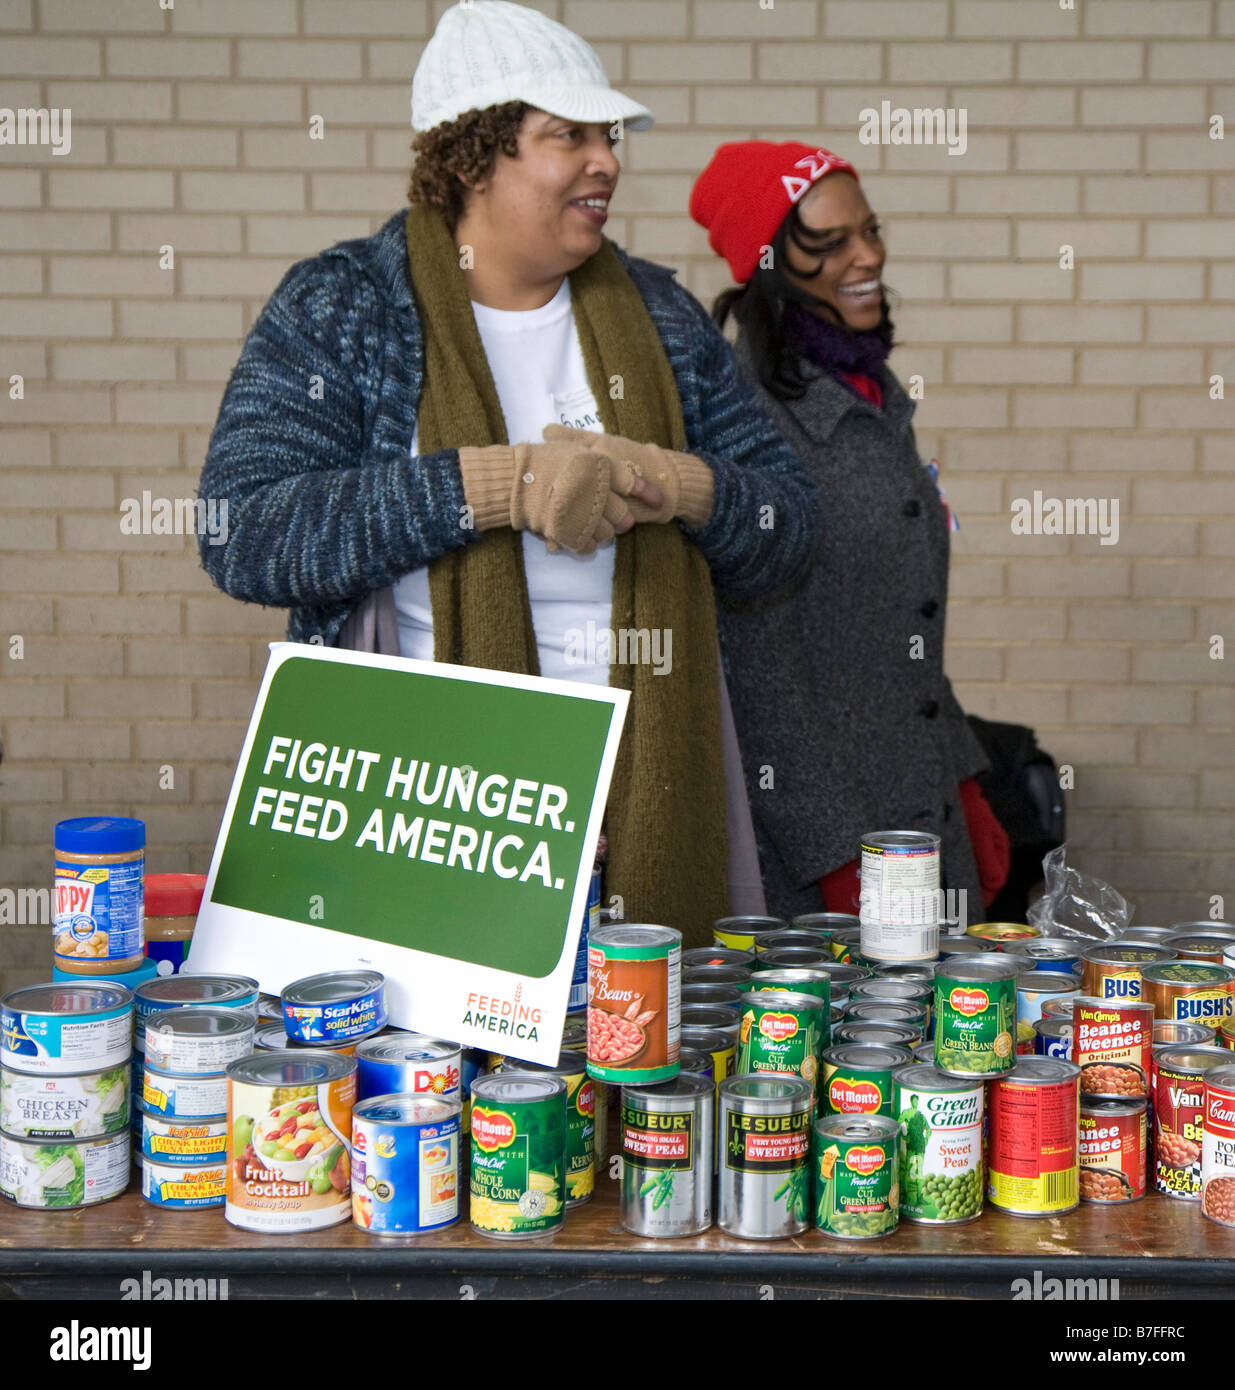 Volunteers Collect Canned Goods for Food Banks Stock Photo